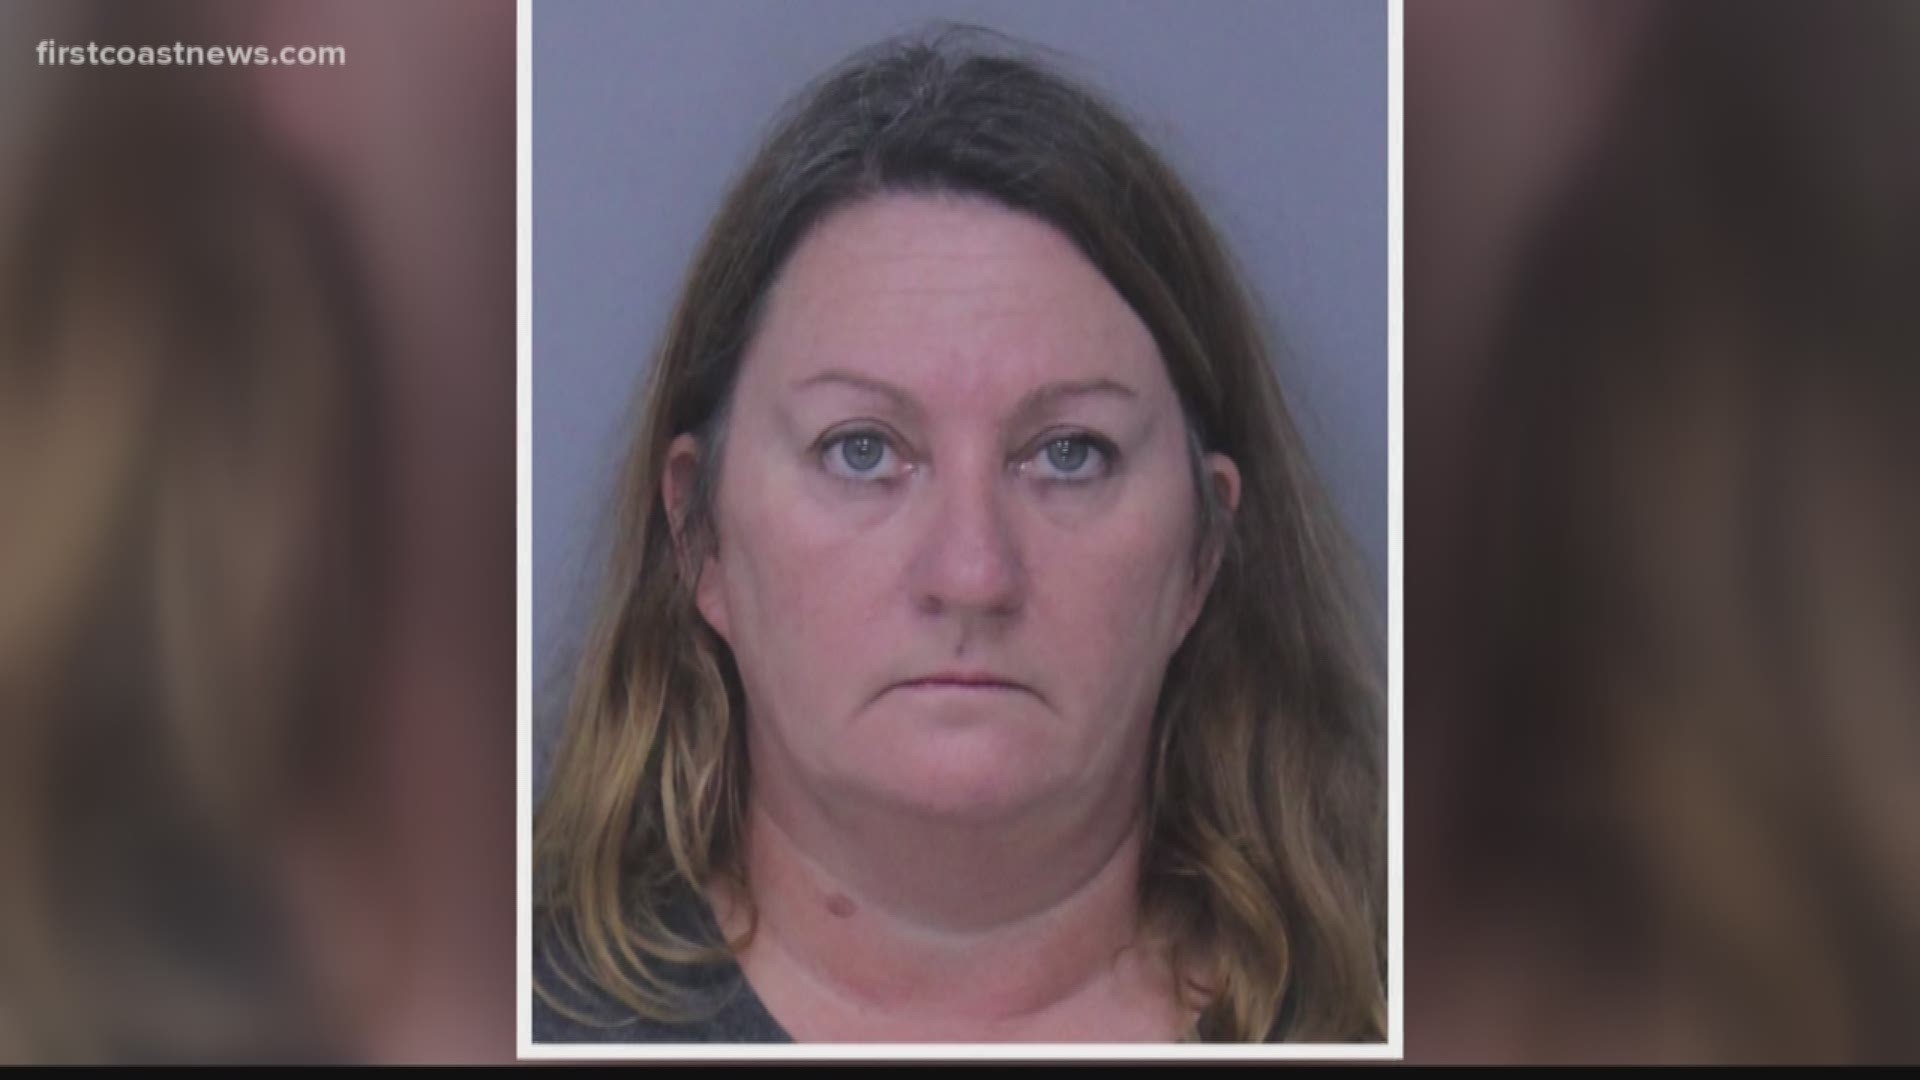 In the report, FHP states that 46-year-old Kim Johnston had slurred speech and reeked of alcohol when they arrived on the scene.